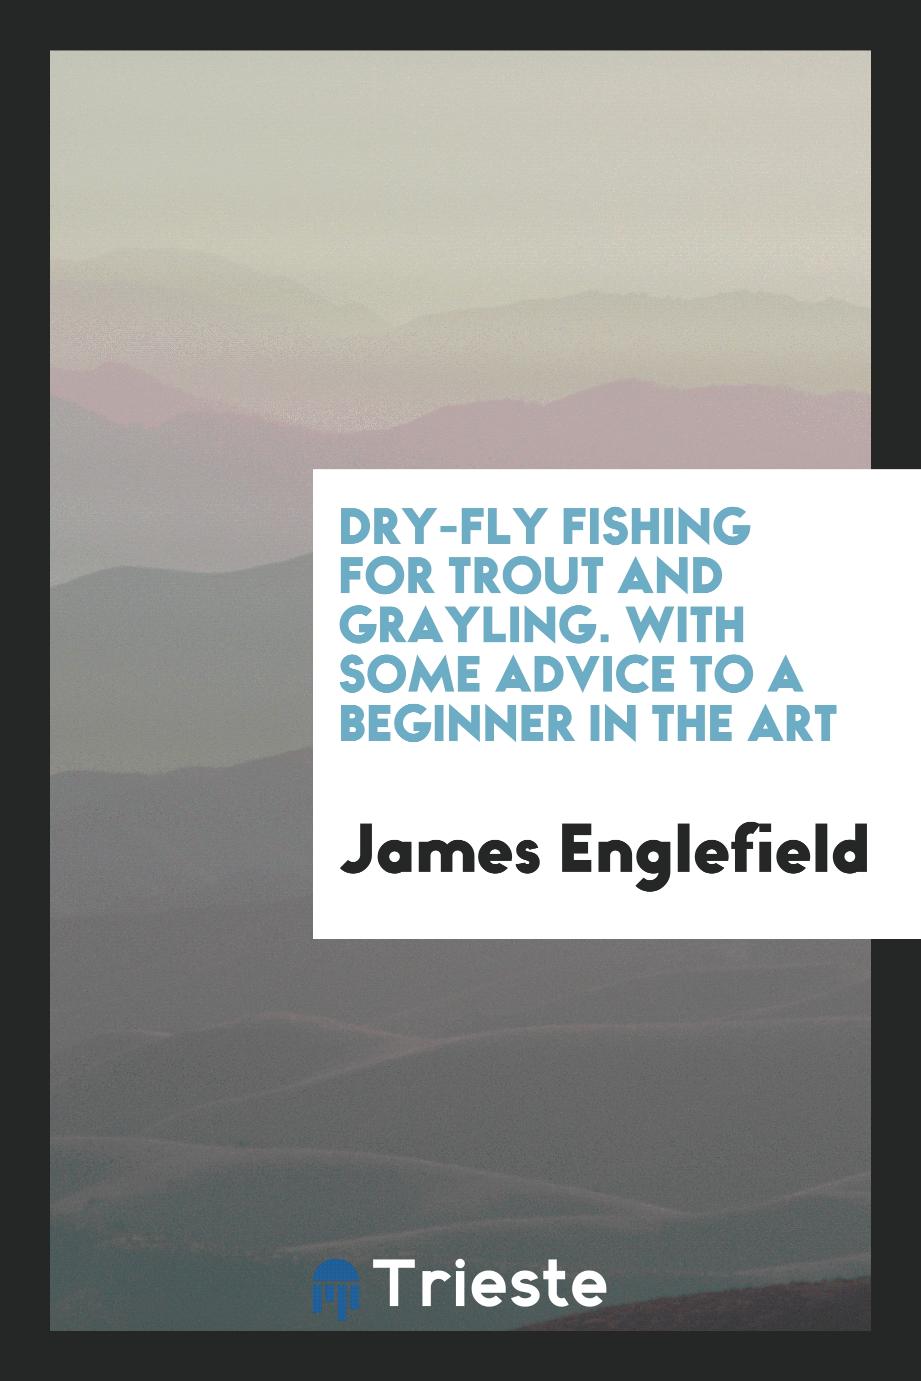 Dry-fly fishing for trout and grayling. With some advice to a beginner in the art